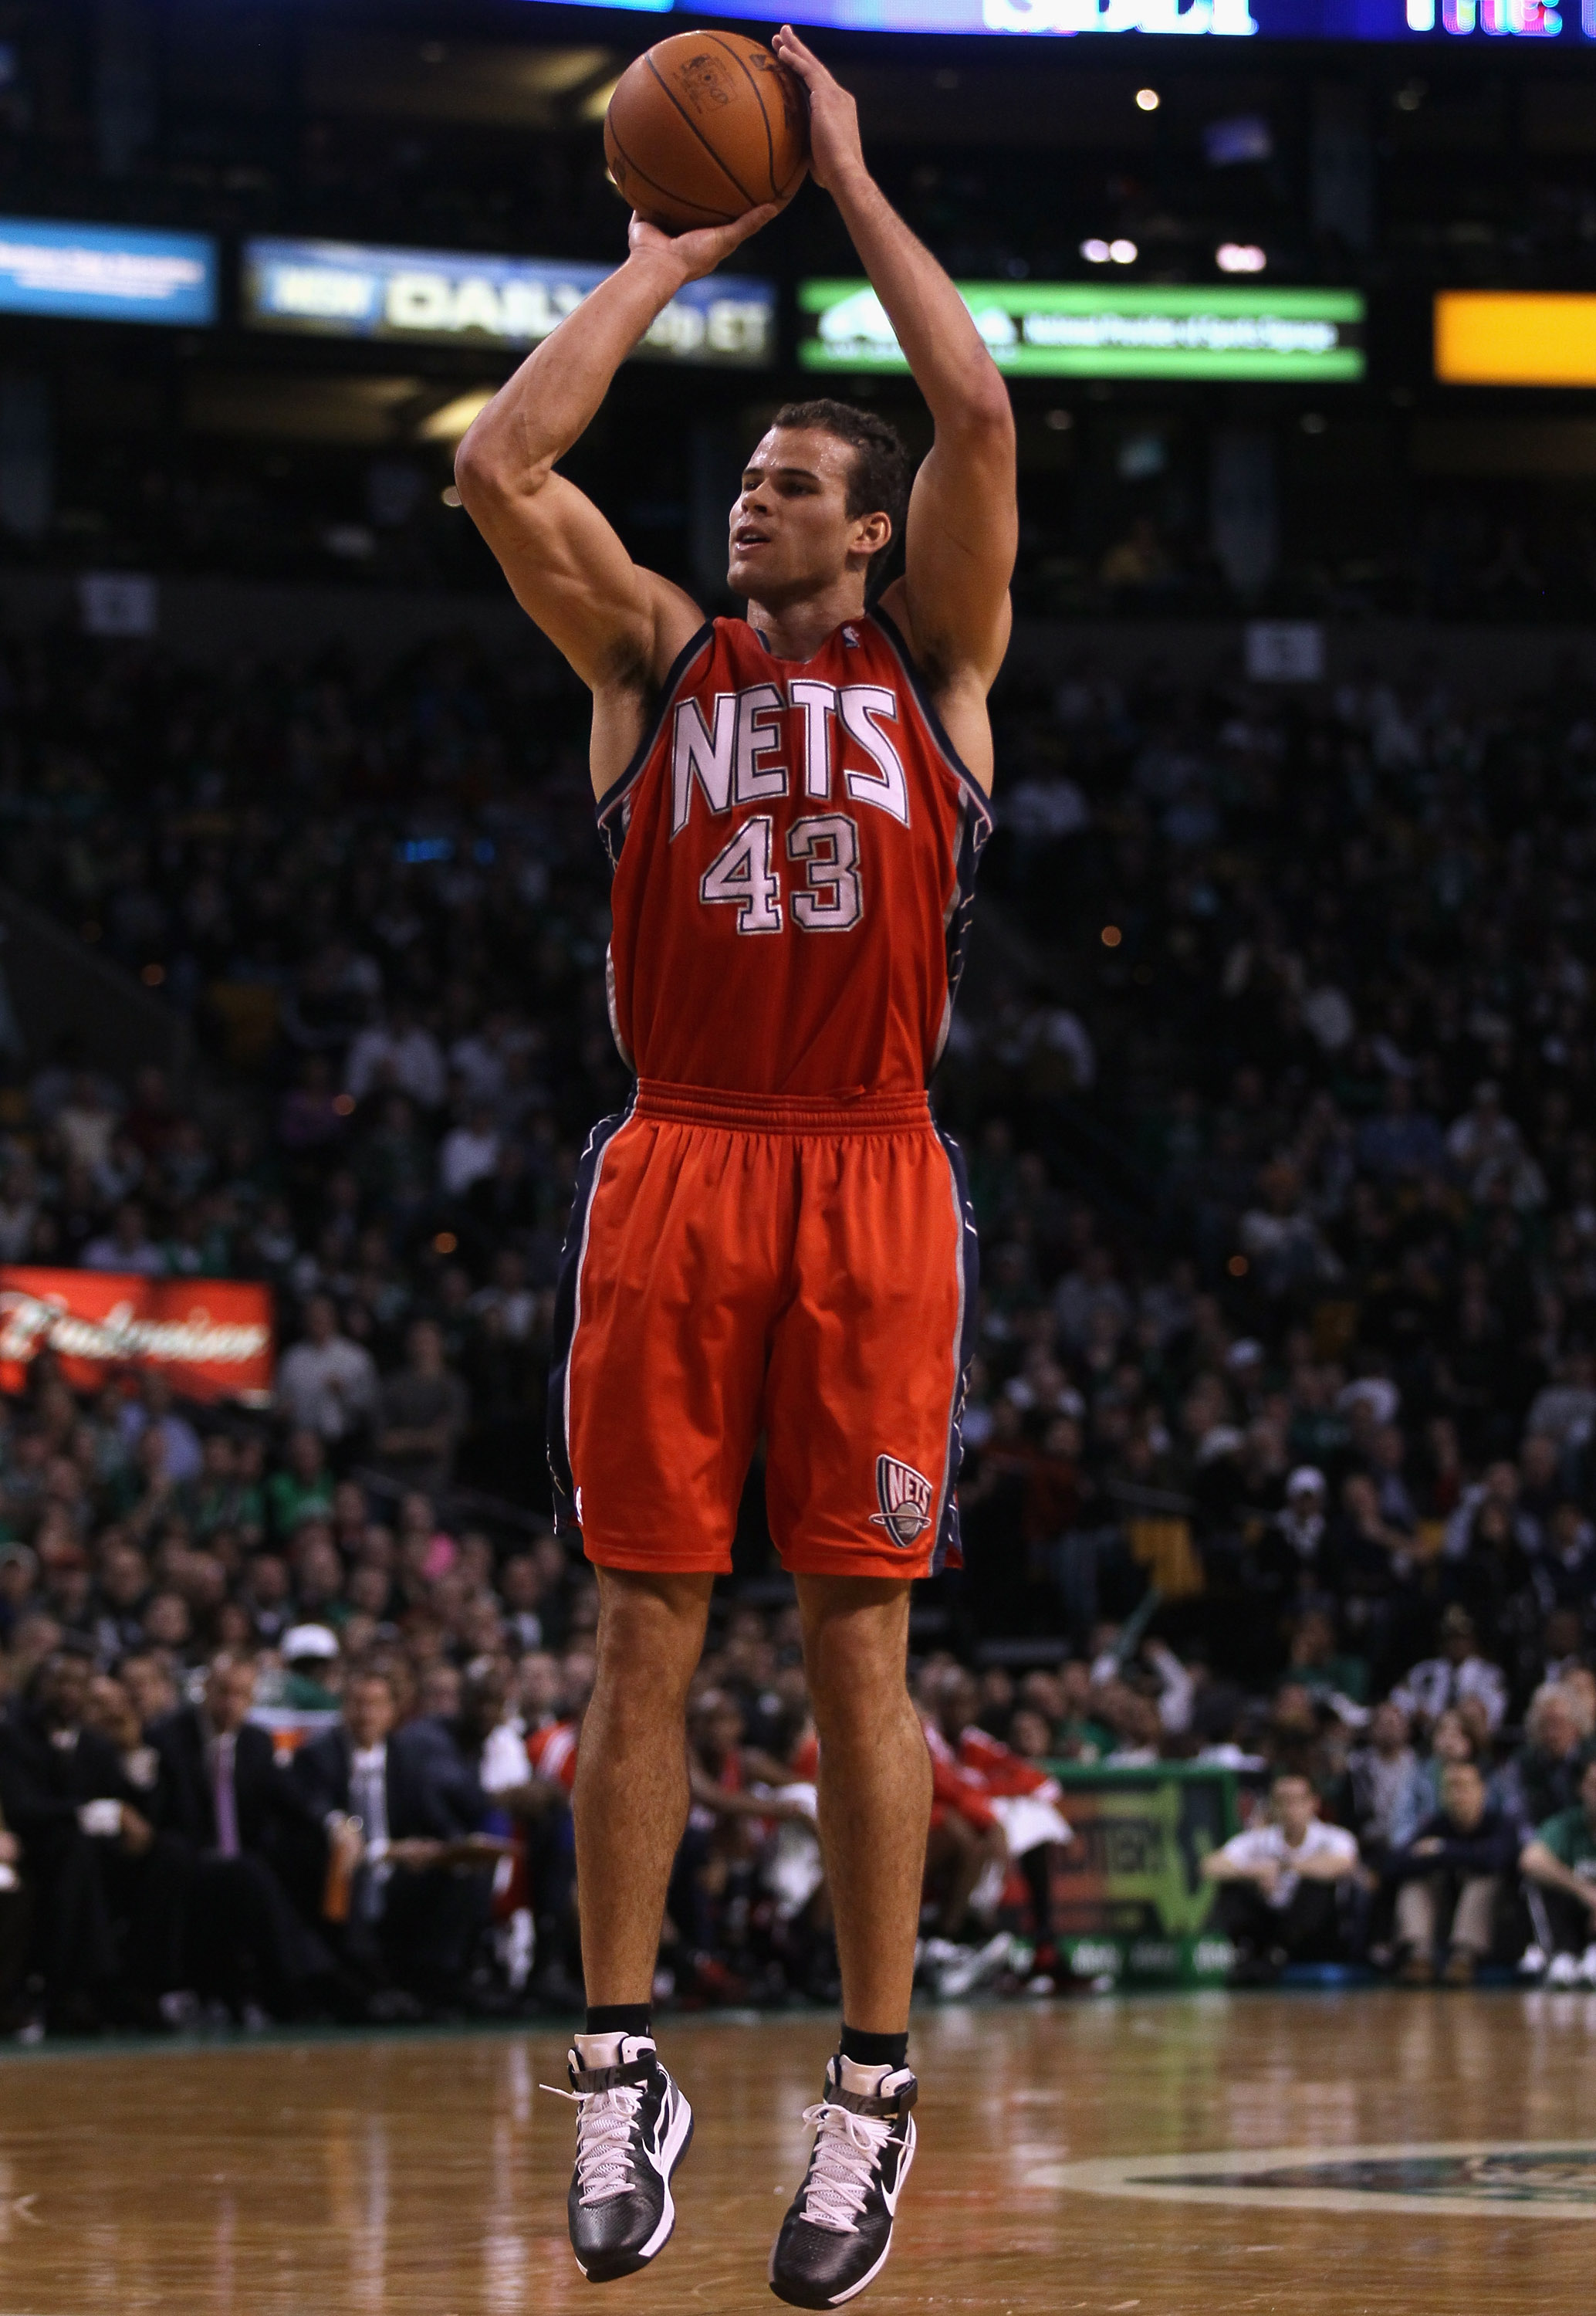 BOSTON - NOVEMBER 24:  Kris Humphries #43 of the New Jersey Nets takes a shot in the second half against the Boston Celtics on November 24, 2010 at the TD Garden in Boston, Massachusetts. The Celtics defeated the nets 89-83. NOTE TO USER: User expressly a